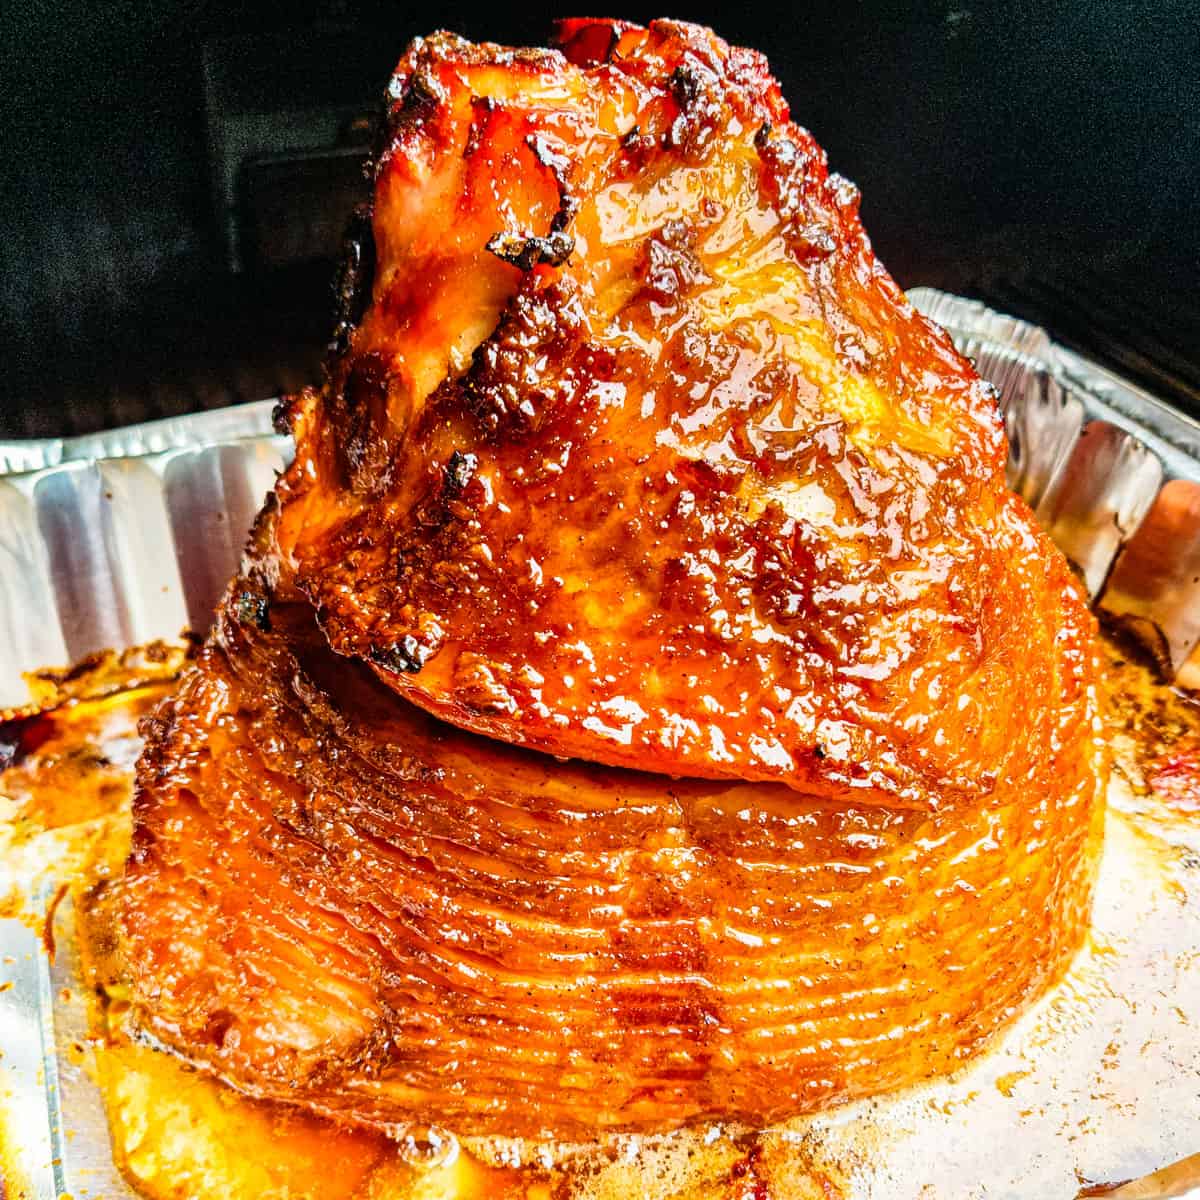 A spiral sliced ham coated with a honey brown sugar glaze cooking in a smoker.